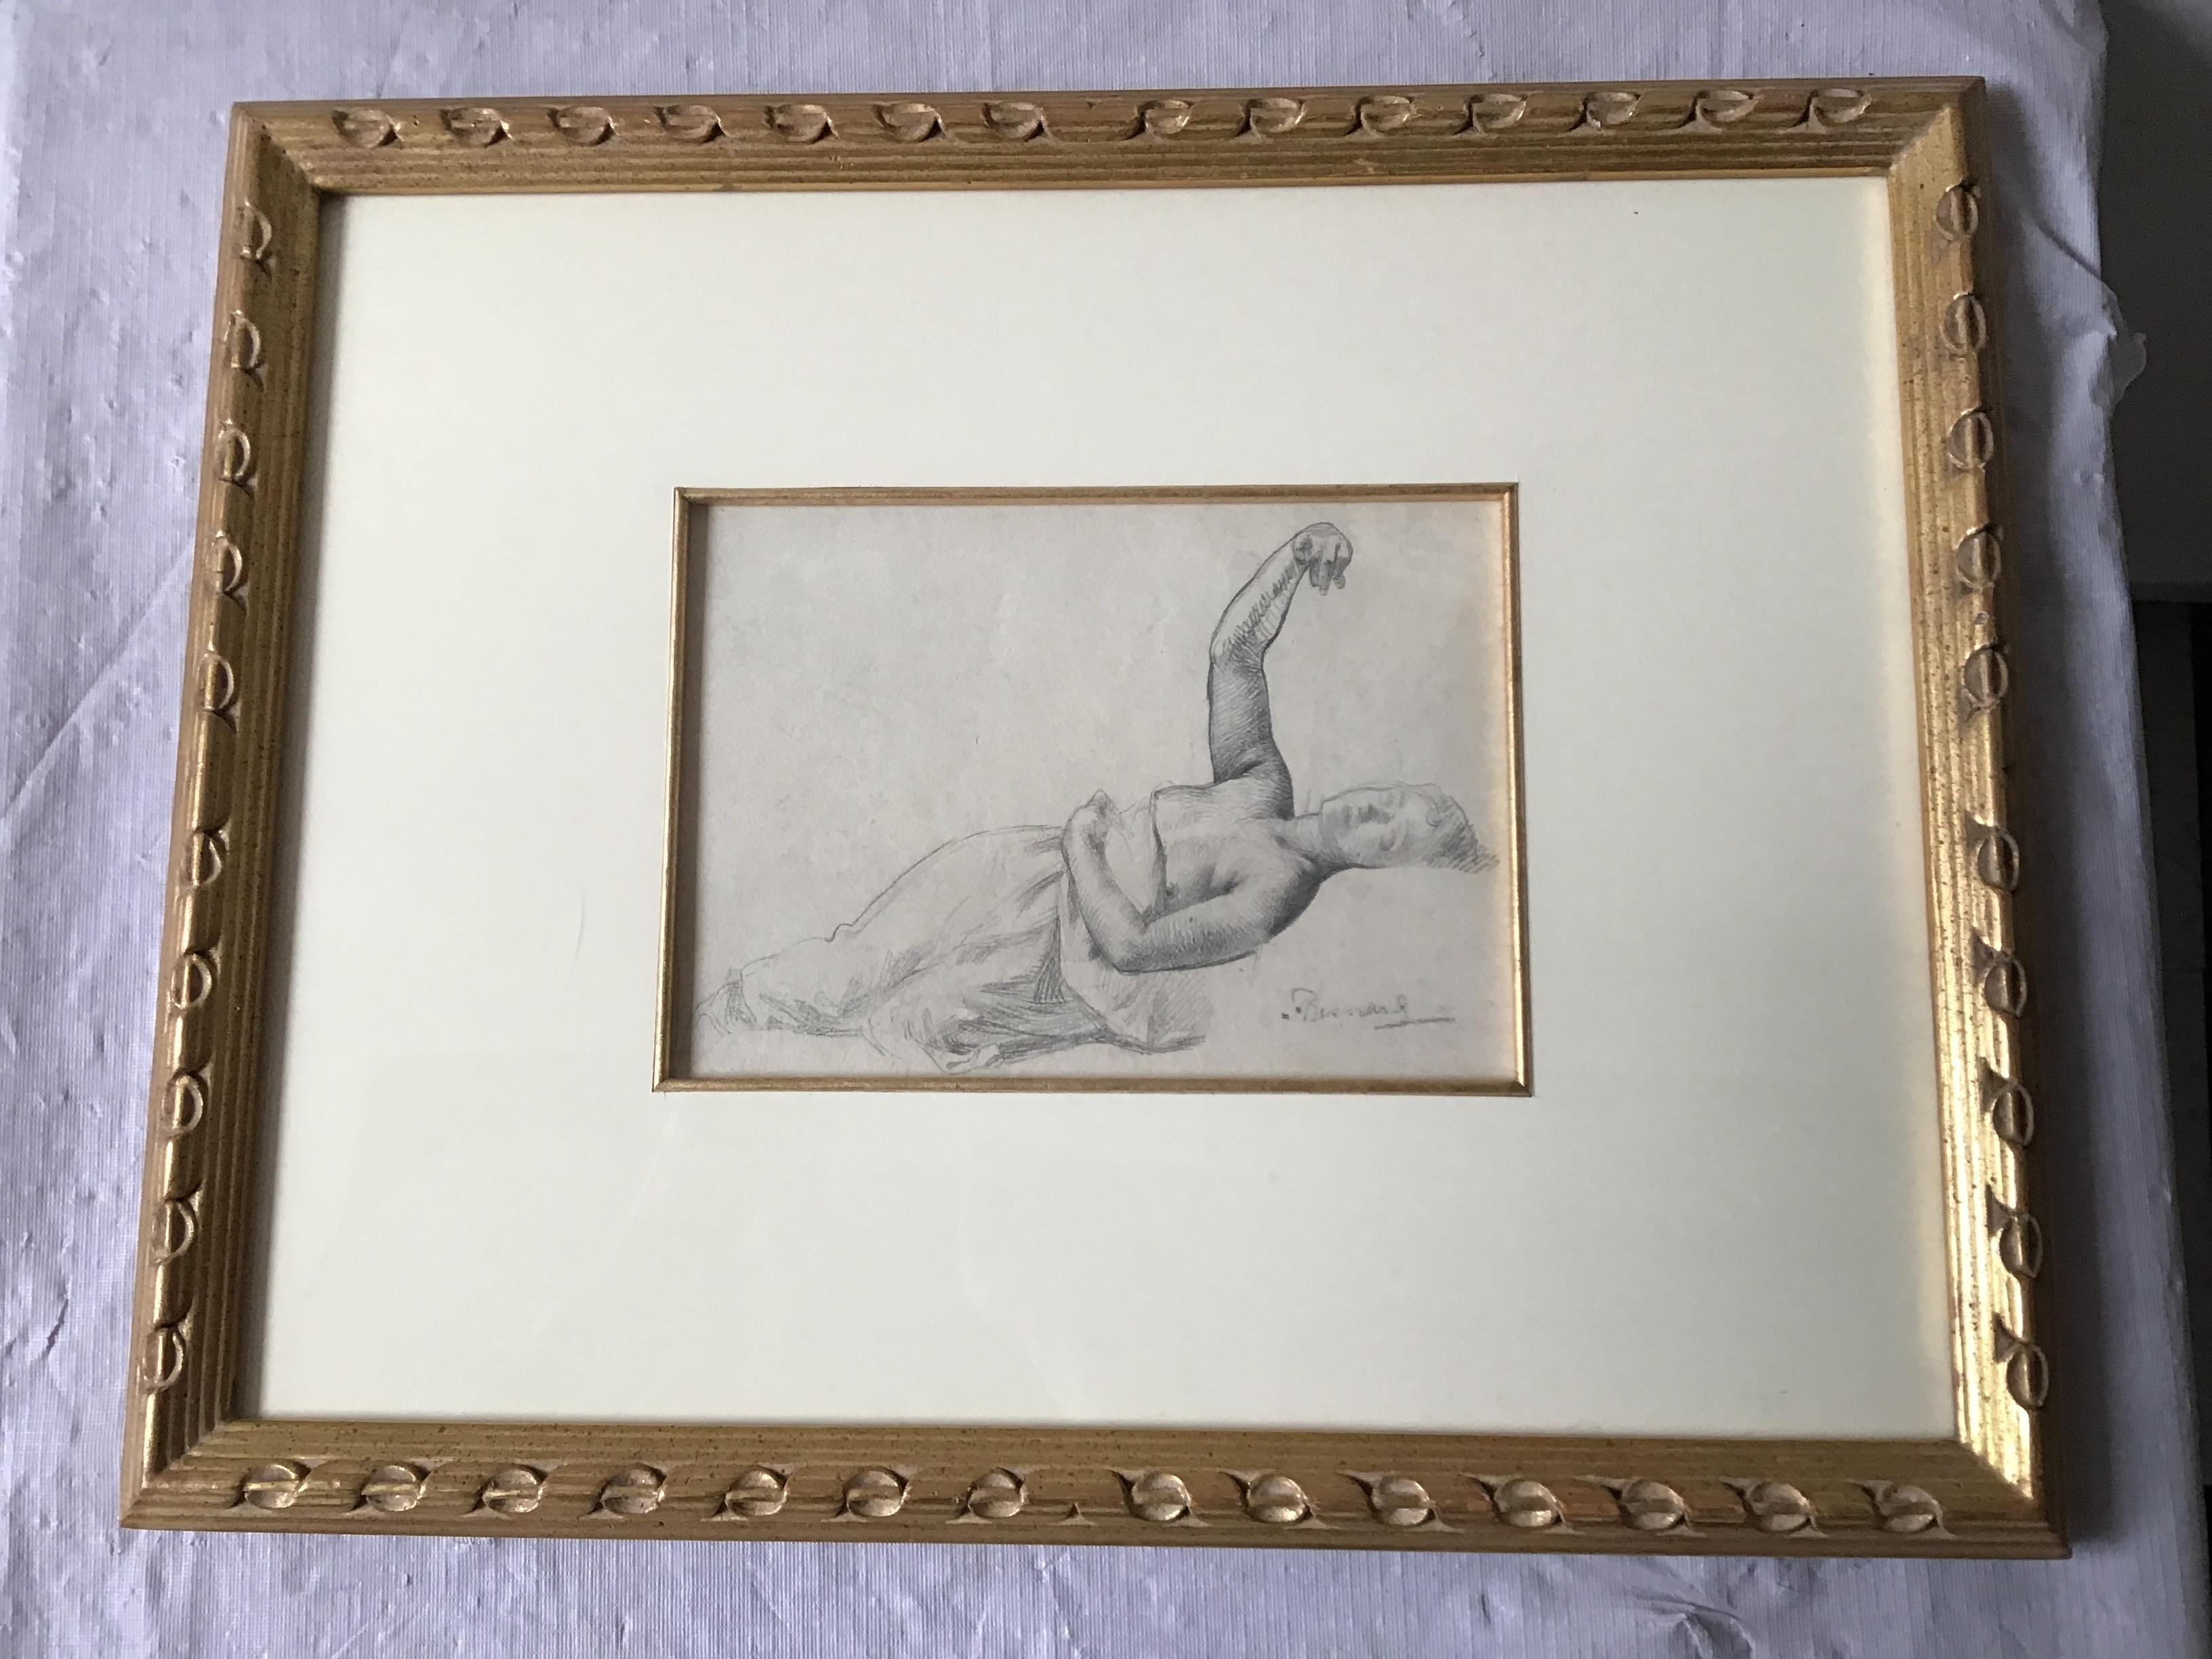 1880s Paul Albert Besnard pencil drawing of a reclining woman. In a gold gilt frame. From a celebrities Southampton, NY oceanfront estate.